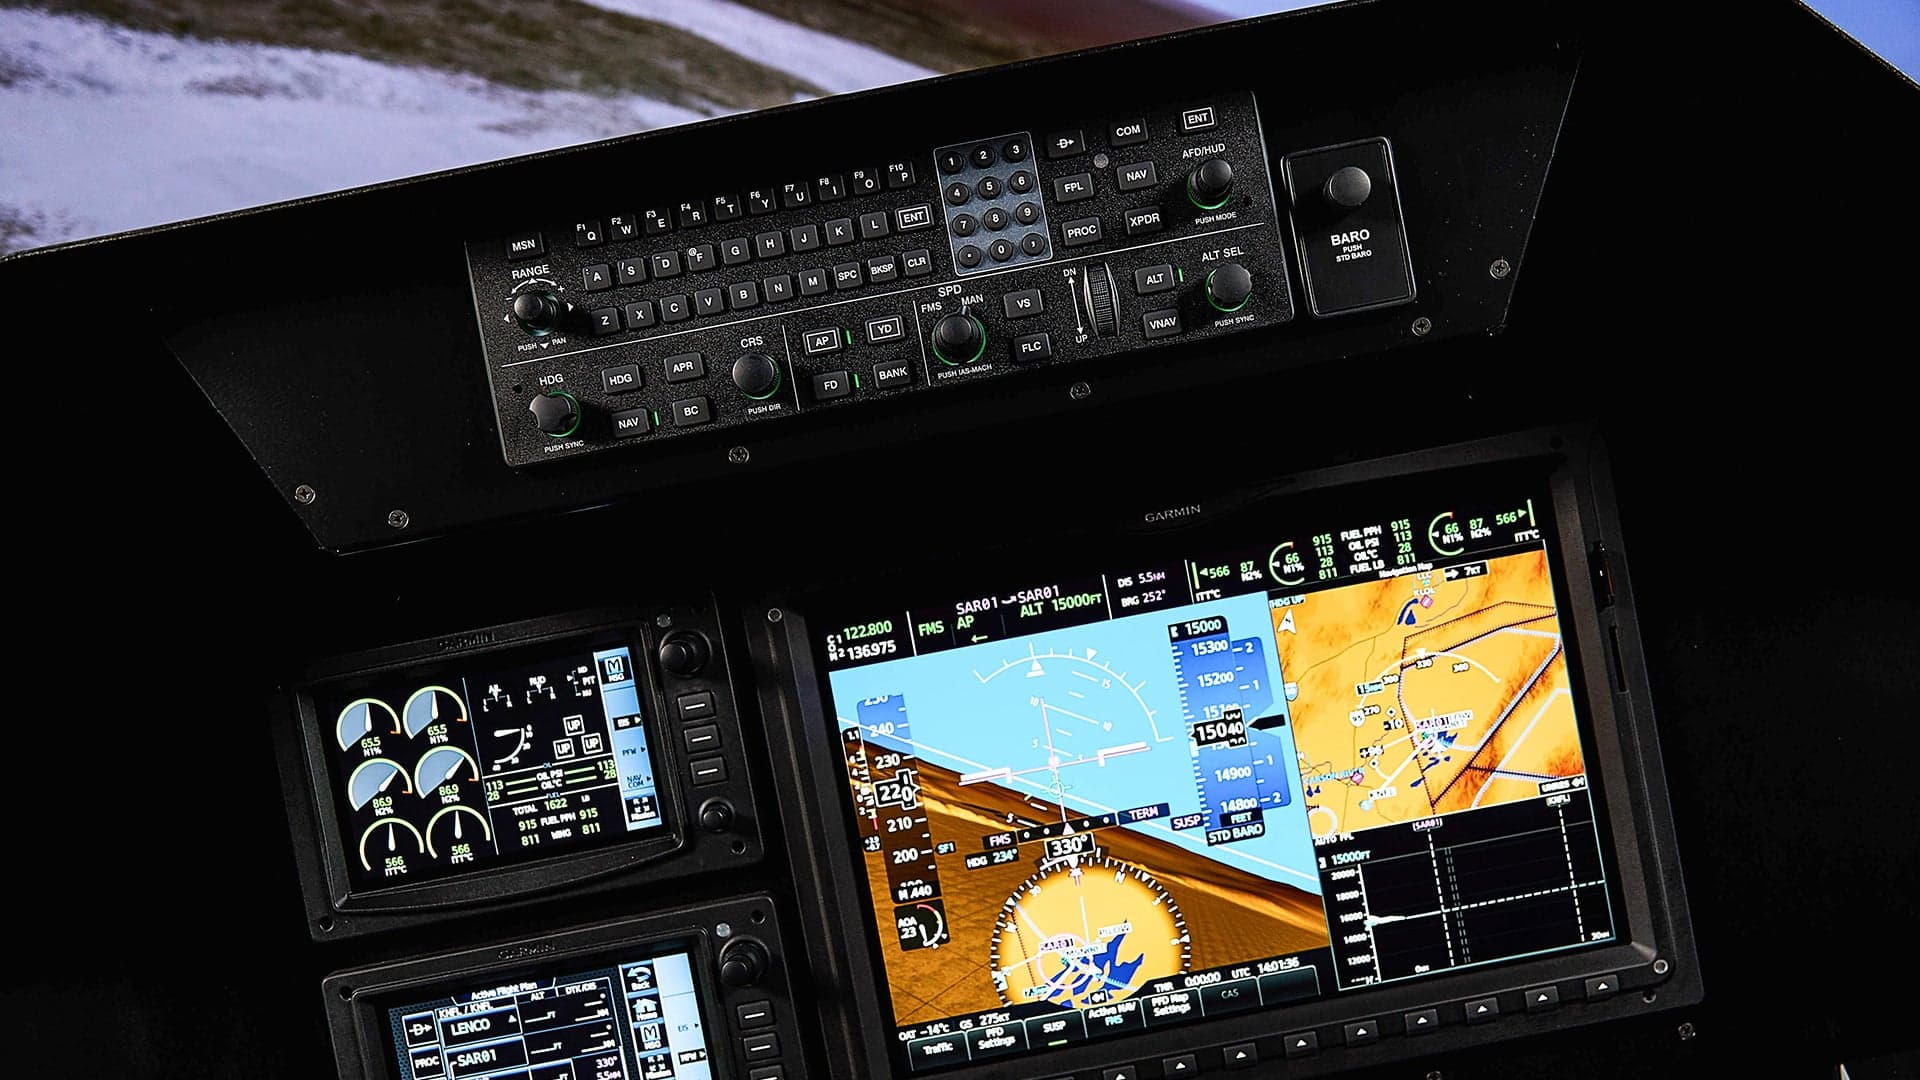 TacAir’s Adversary F-5s Are Getting A Cutting-Edge Cockpit